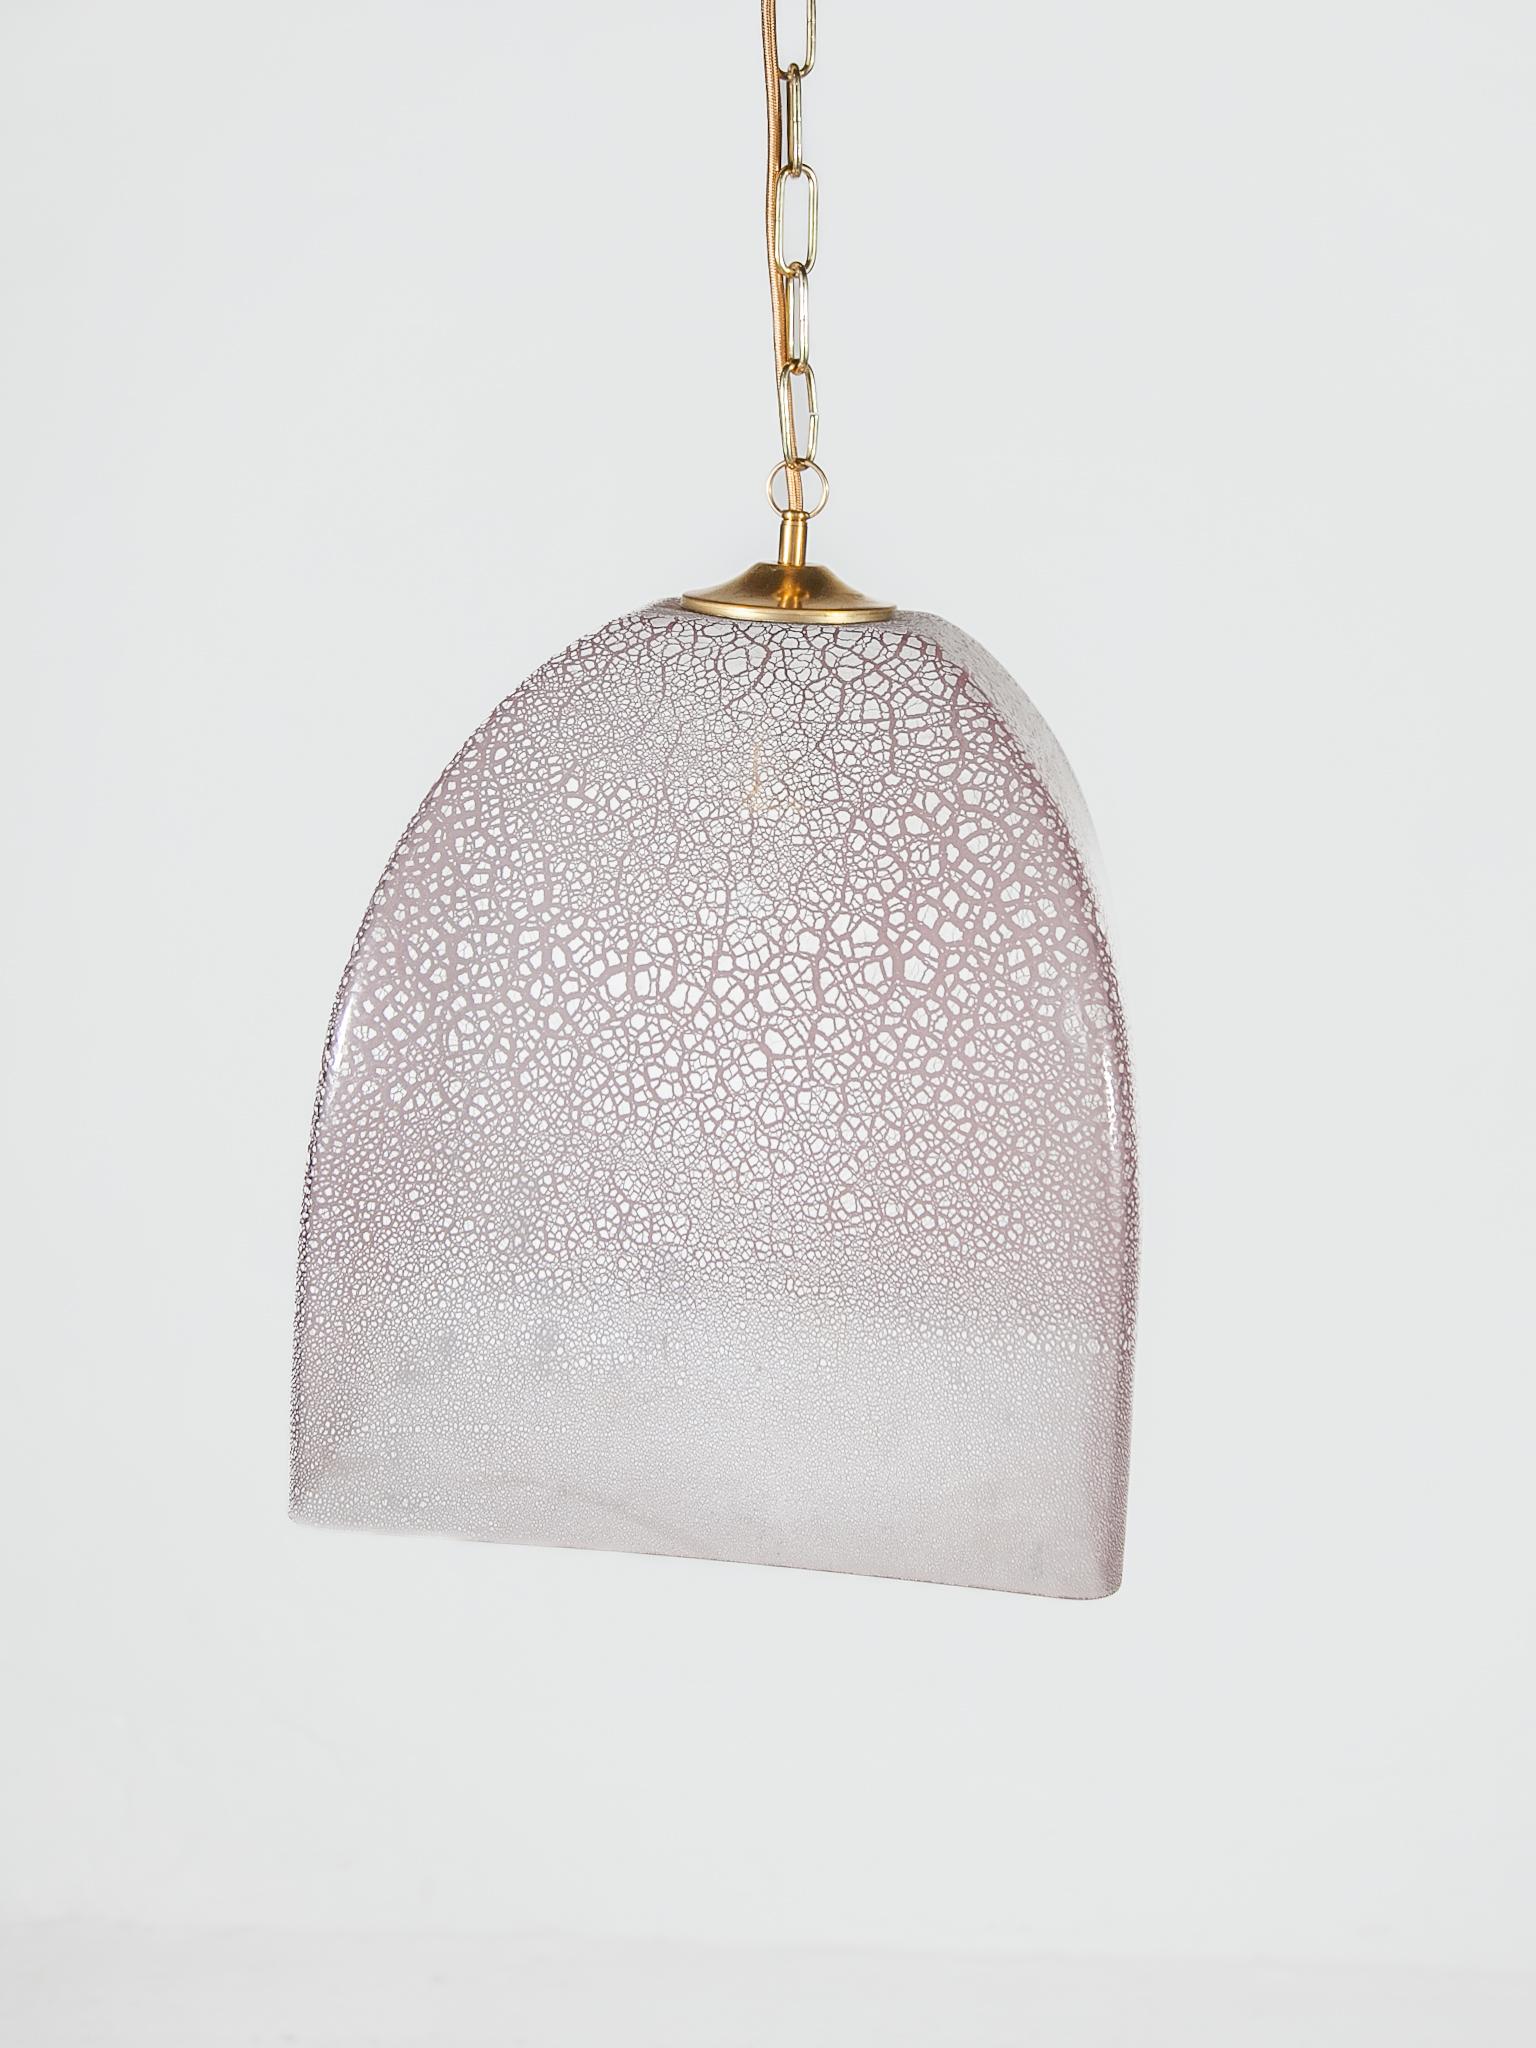 Hand-Crafted Pink Glass Textured Pendant designed by Alfredo Barbini, Italy